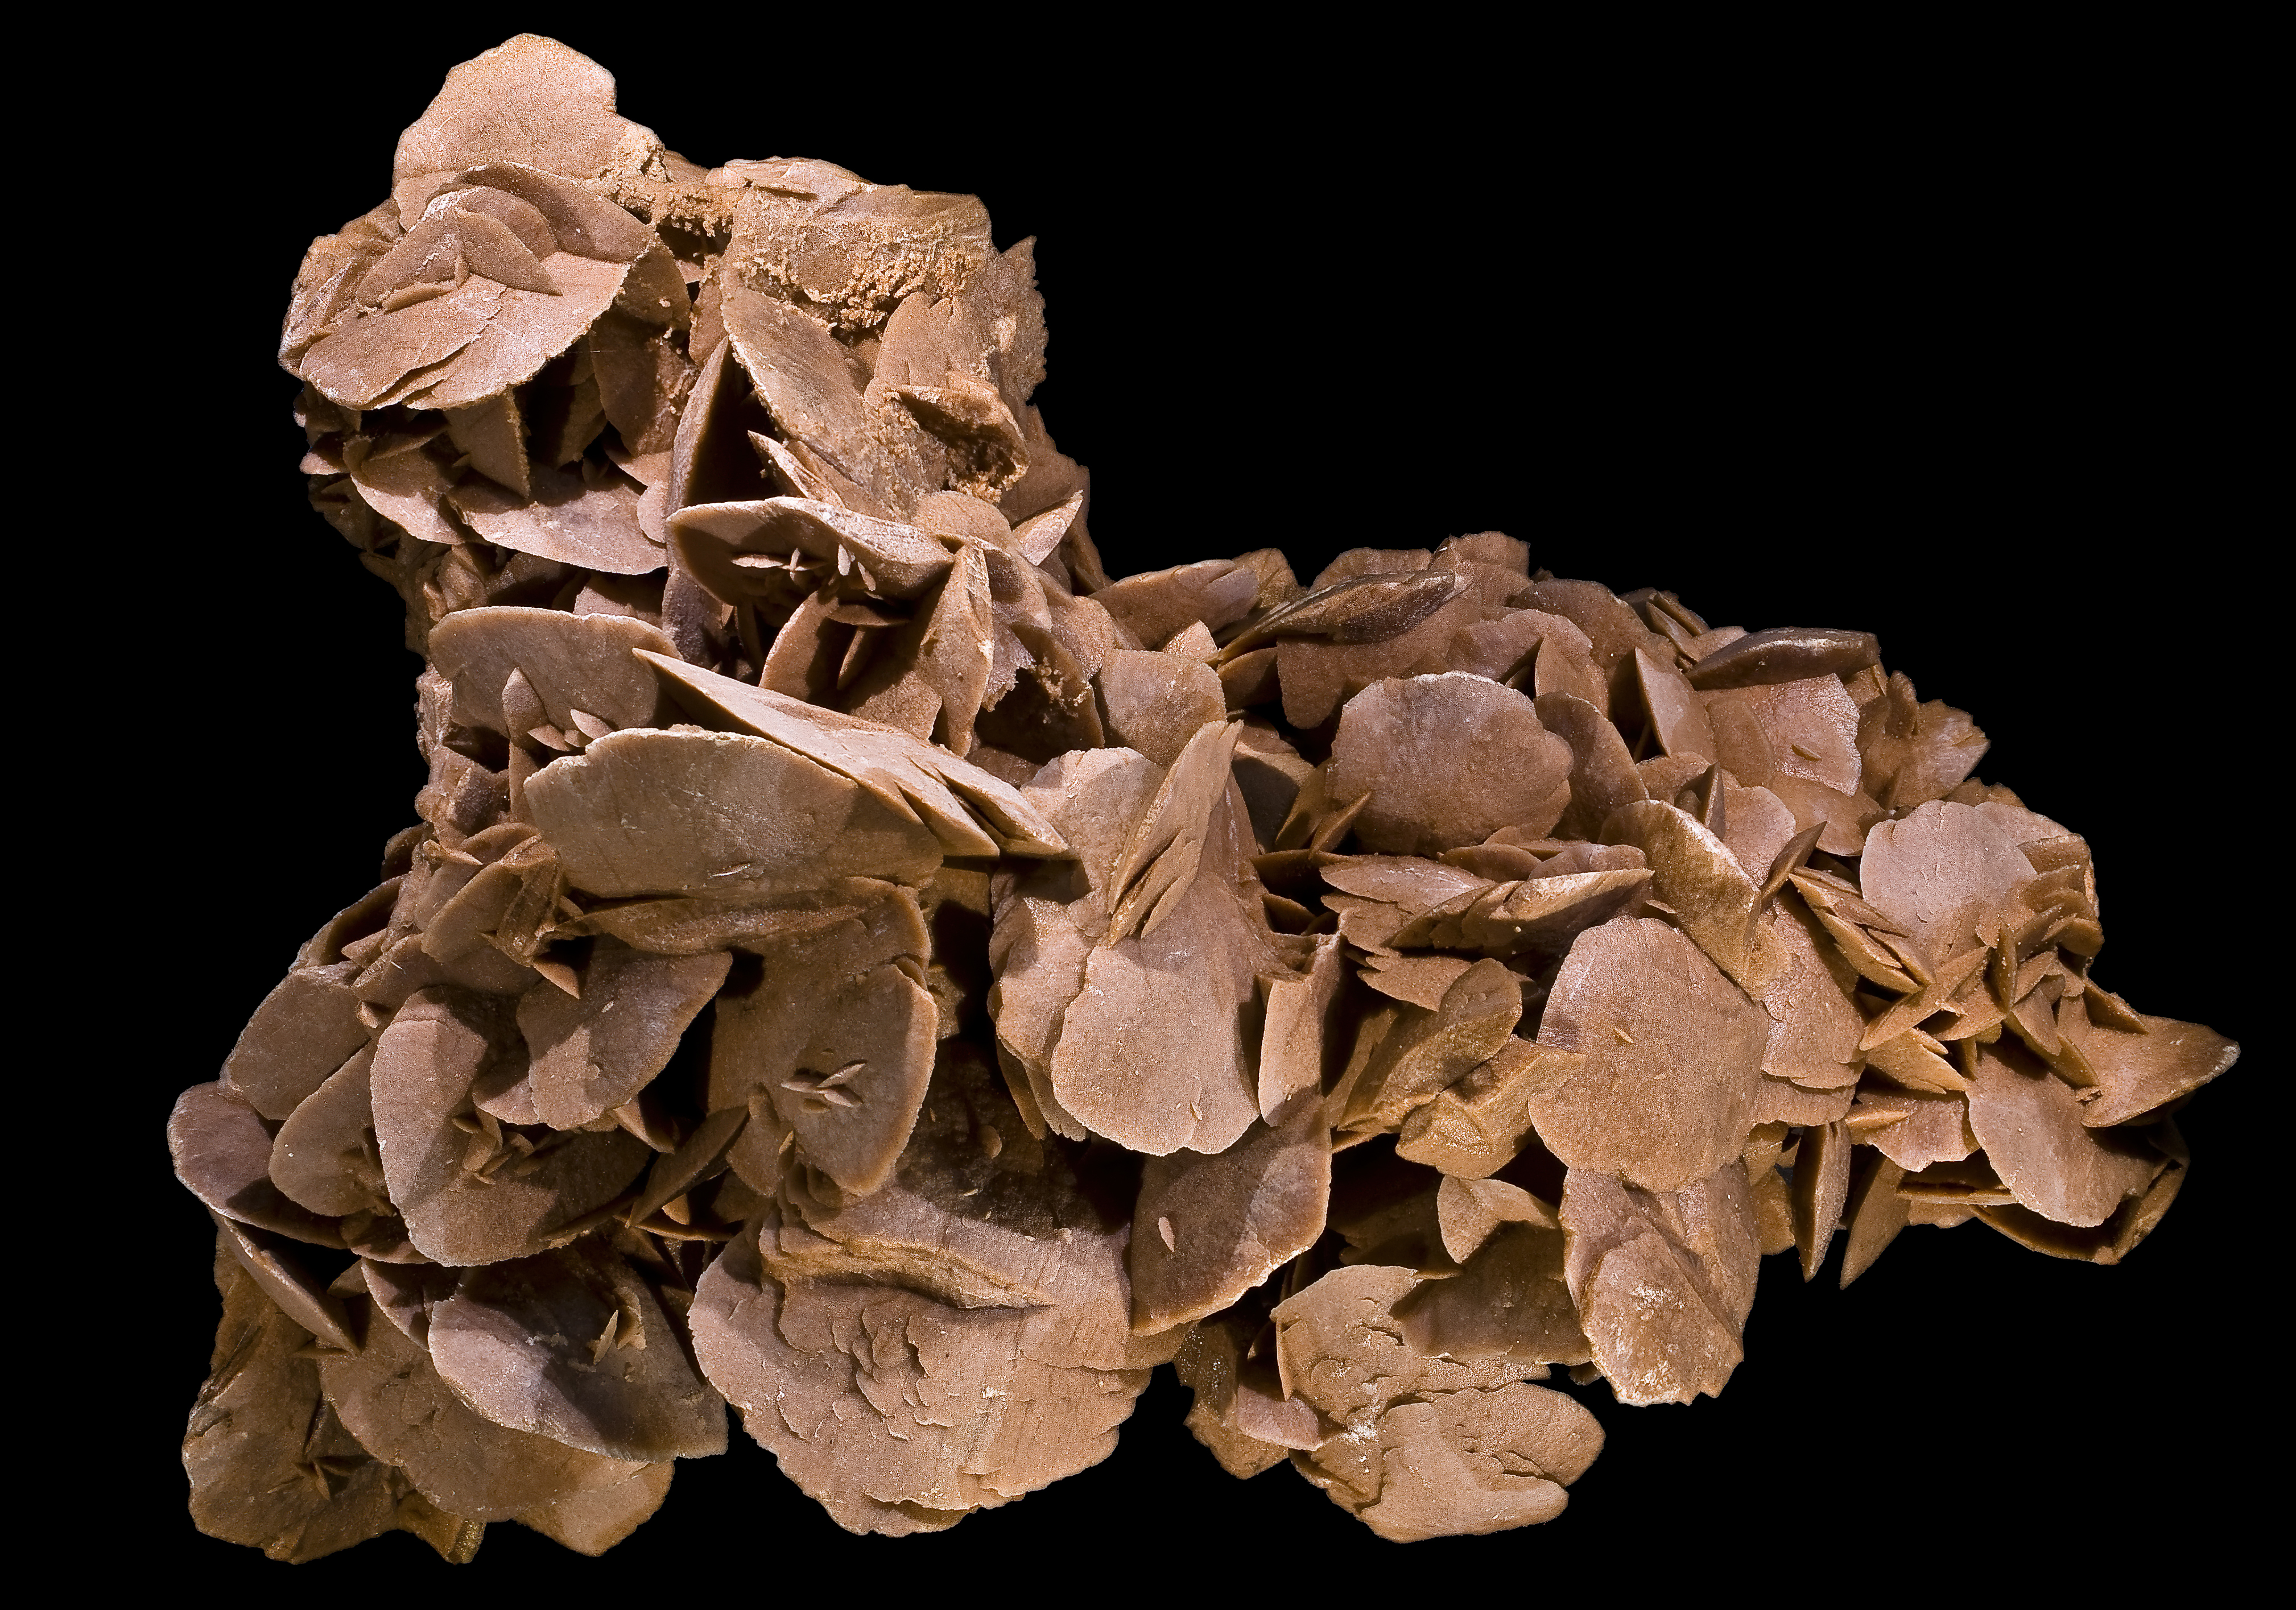 Desert Rose: Meaning, Healing Properties, and Powers